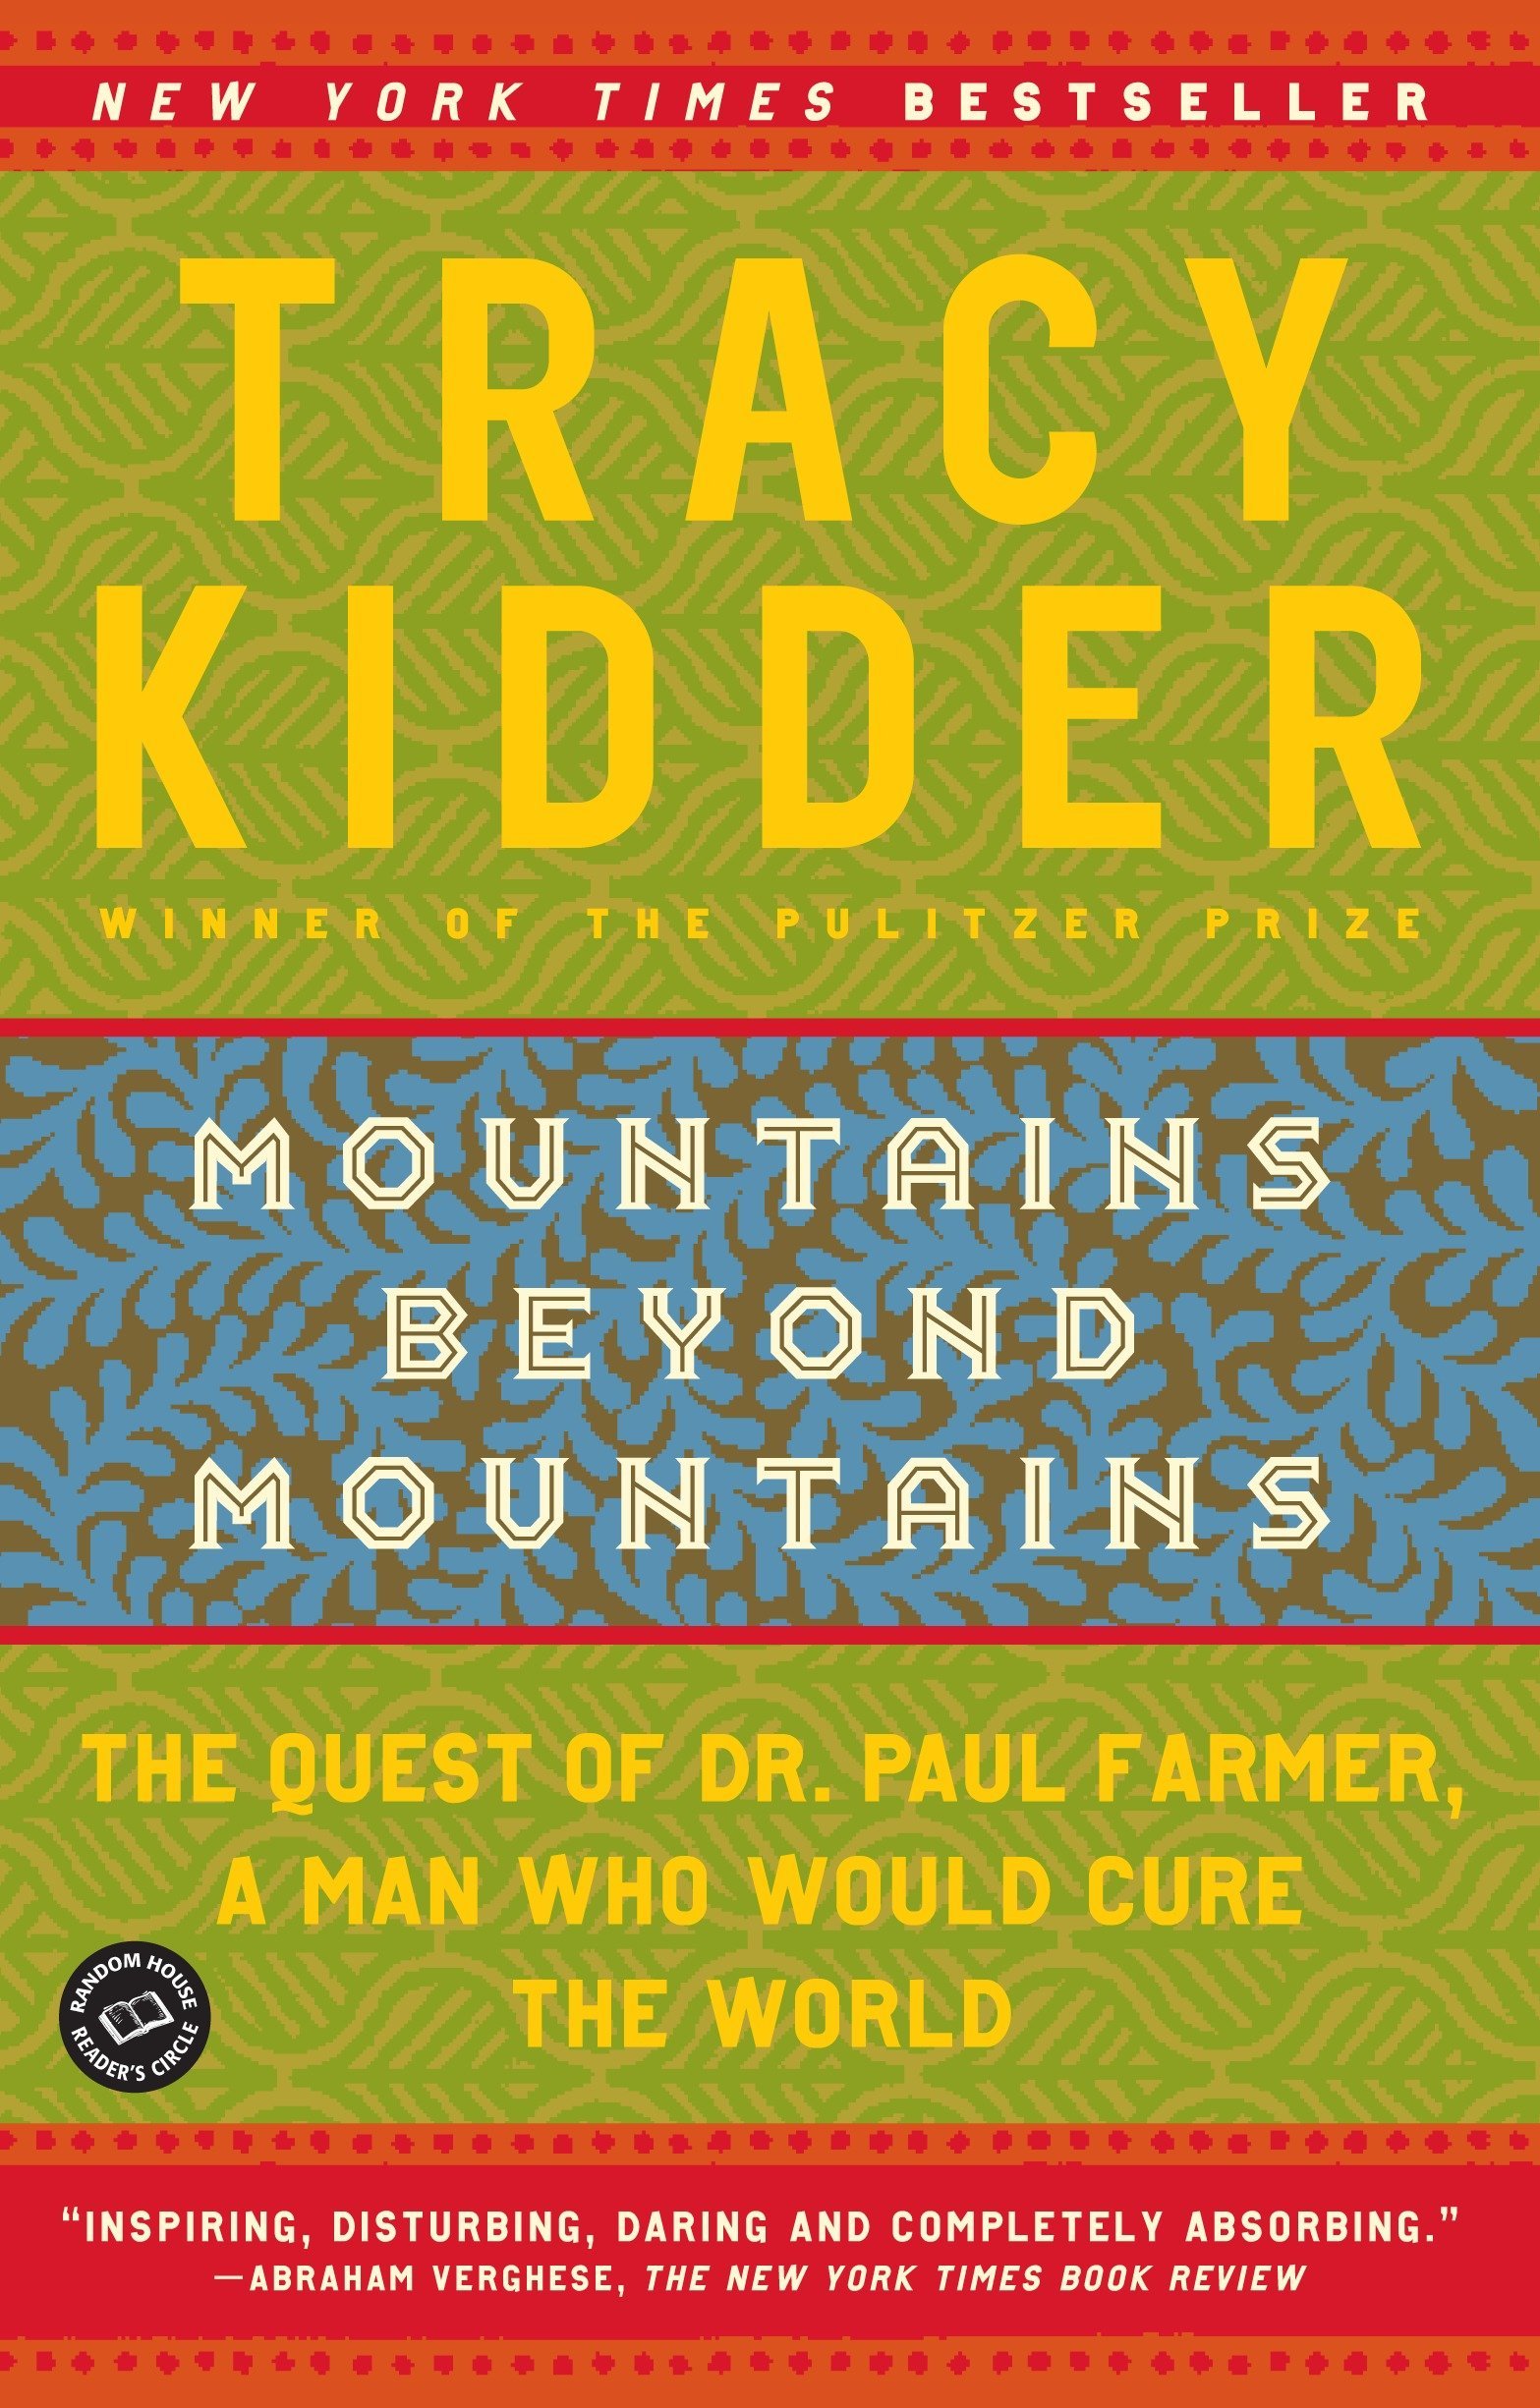 book cover mountains beyond mountains by tracy kidder